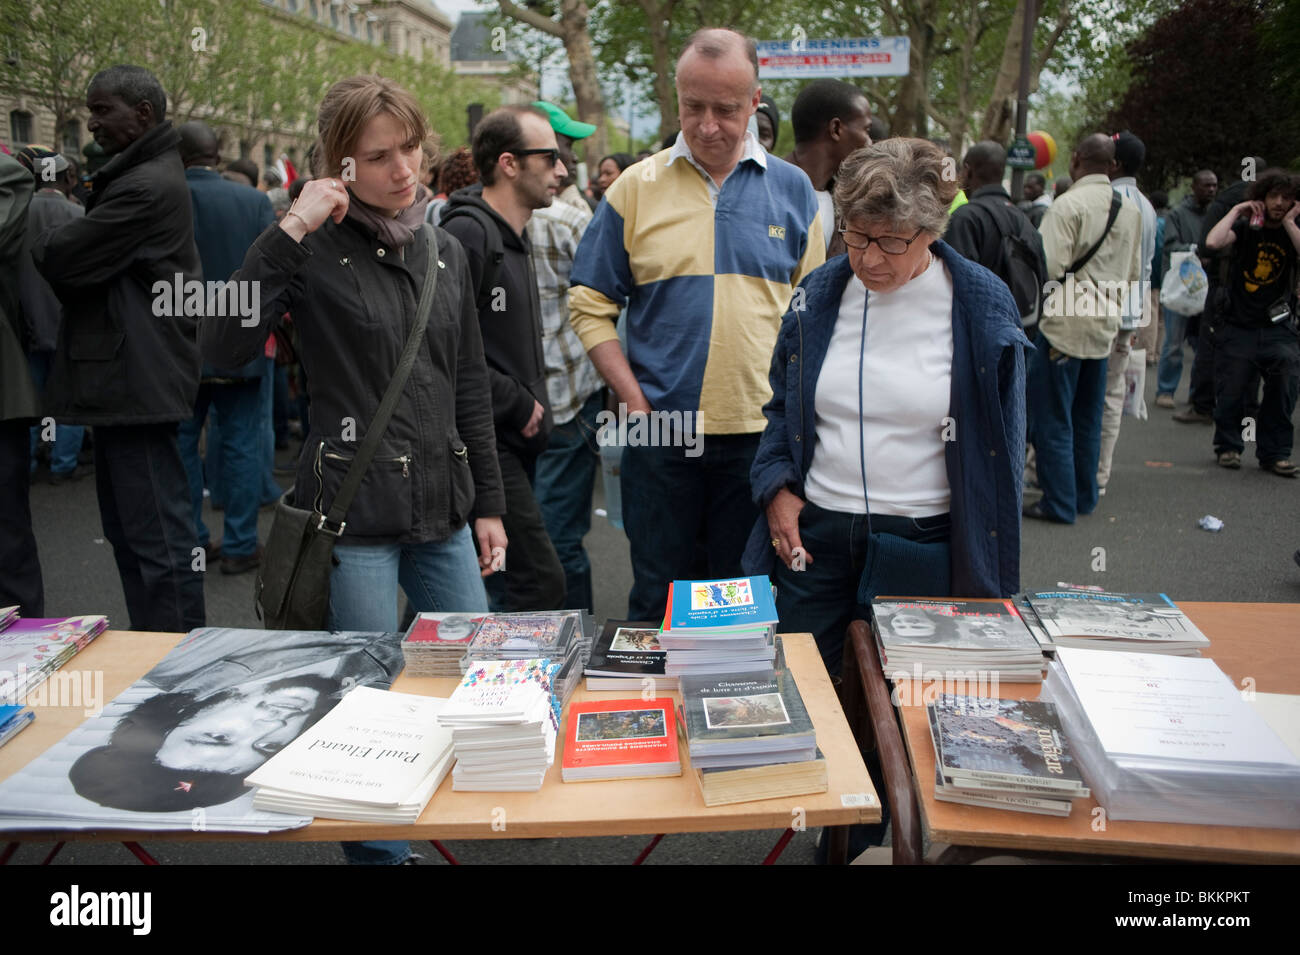 Group People Shopping Books at Street Stall, May 1, May Day Demonstration, Paris, France Stock Photo